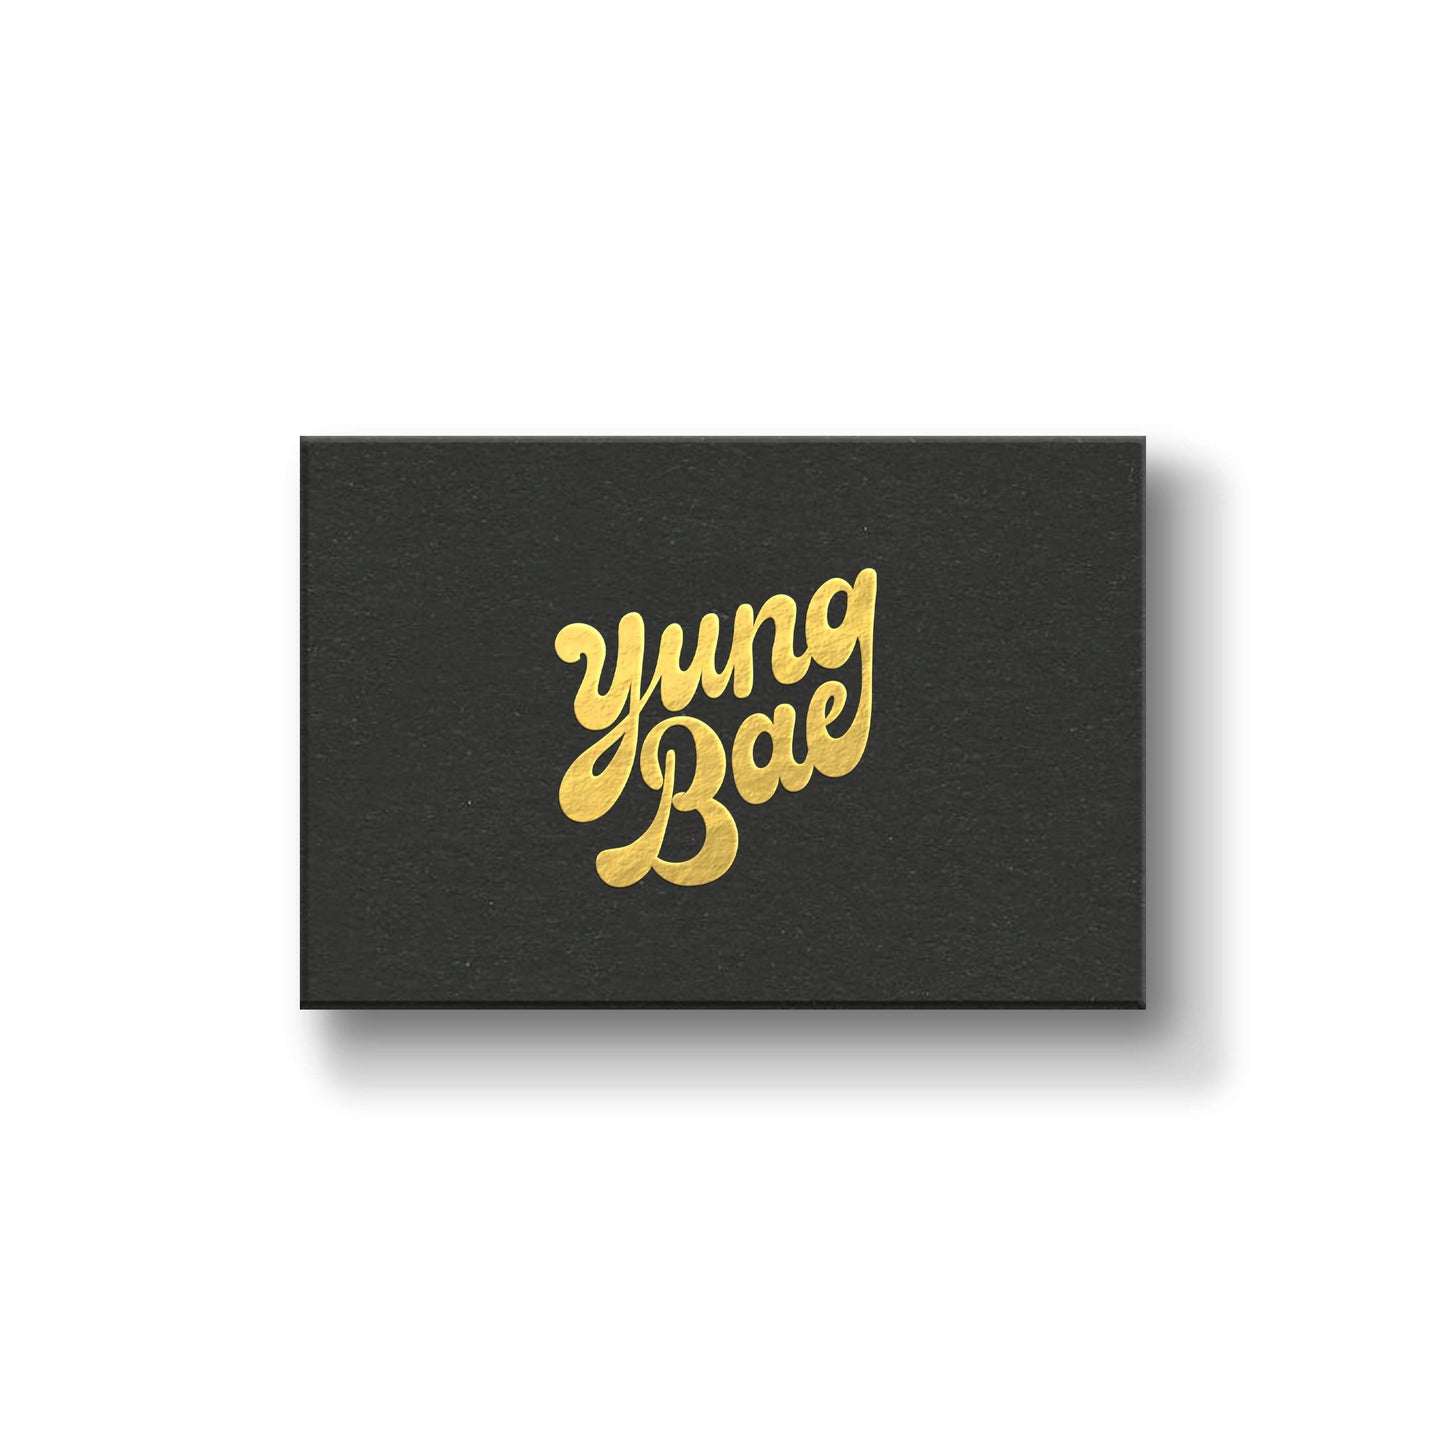 Yung Bae - Japanese Disco Edits Full Collection Cassette Boxset - Neoncity Records